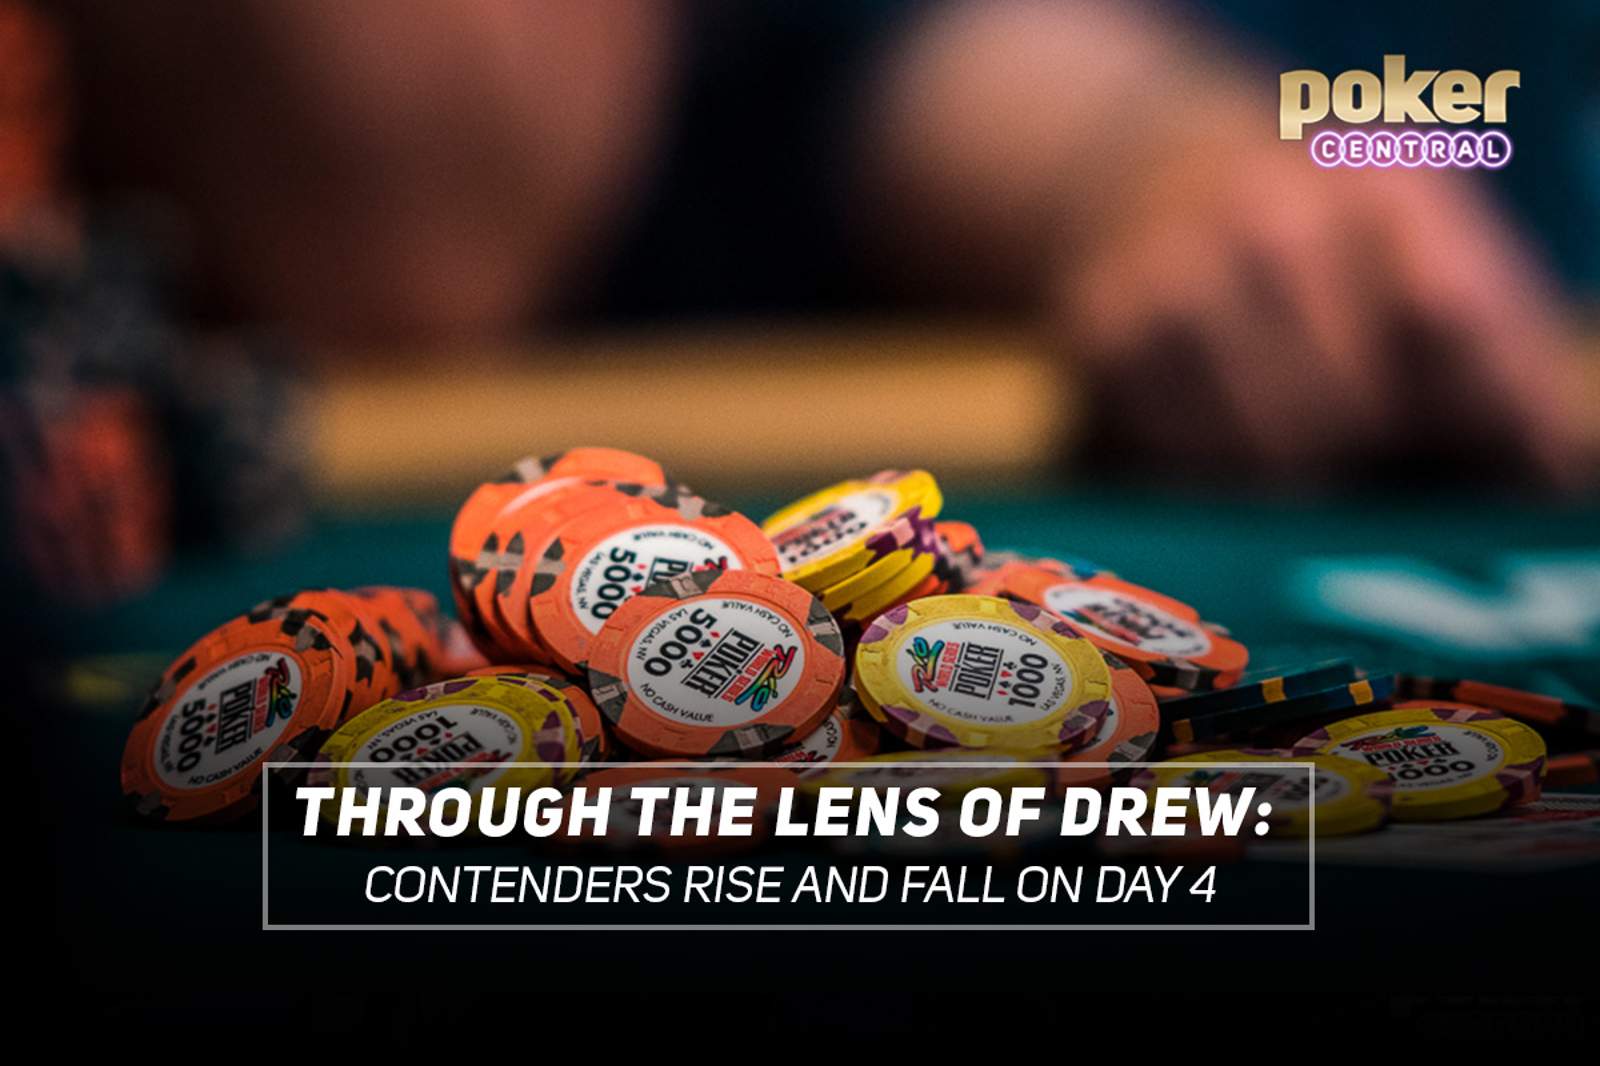 Through The Lens of Drew - Contenders Rise and Fall on Day 4